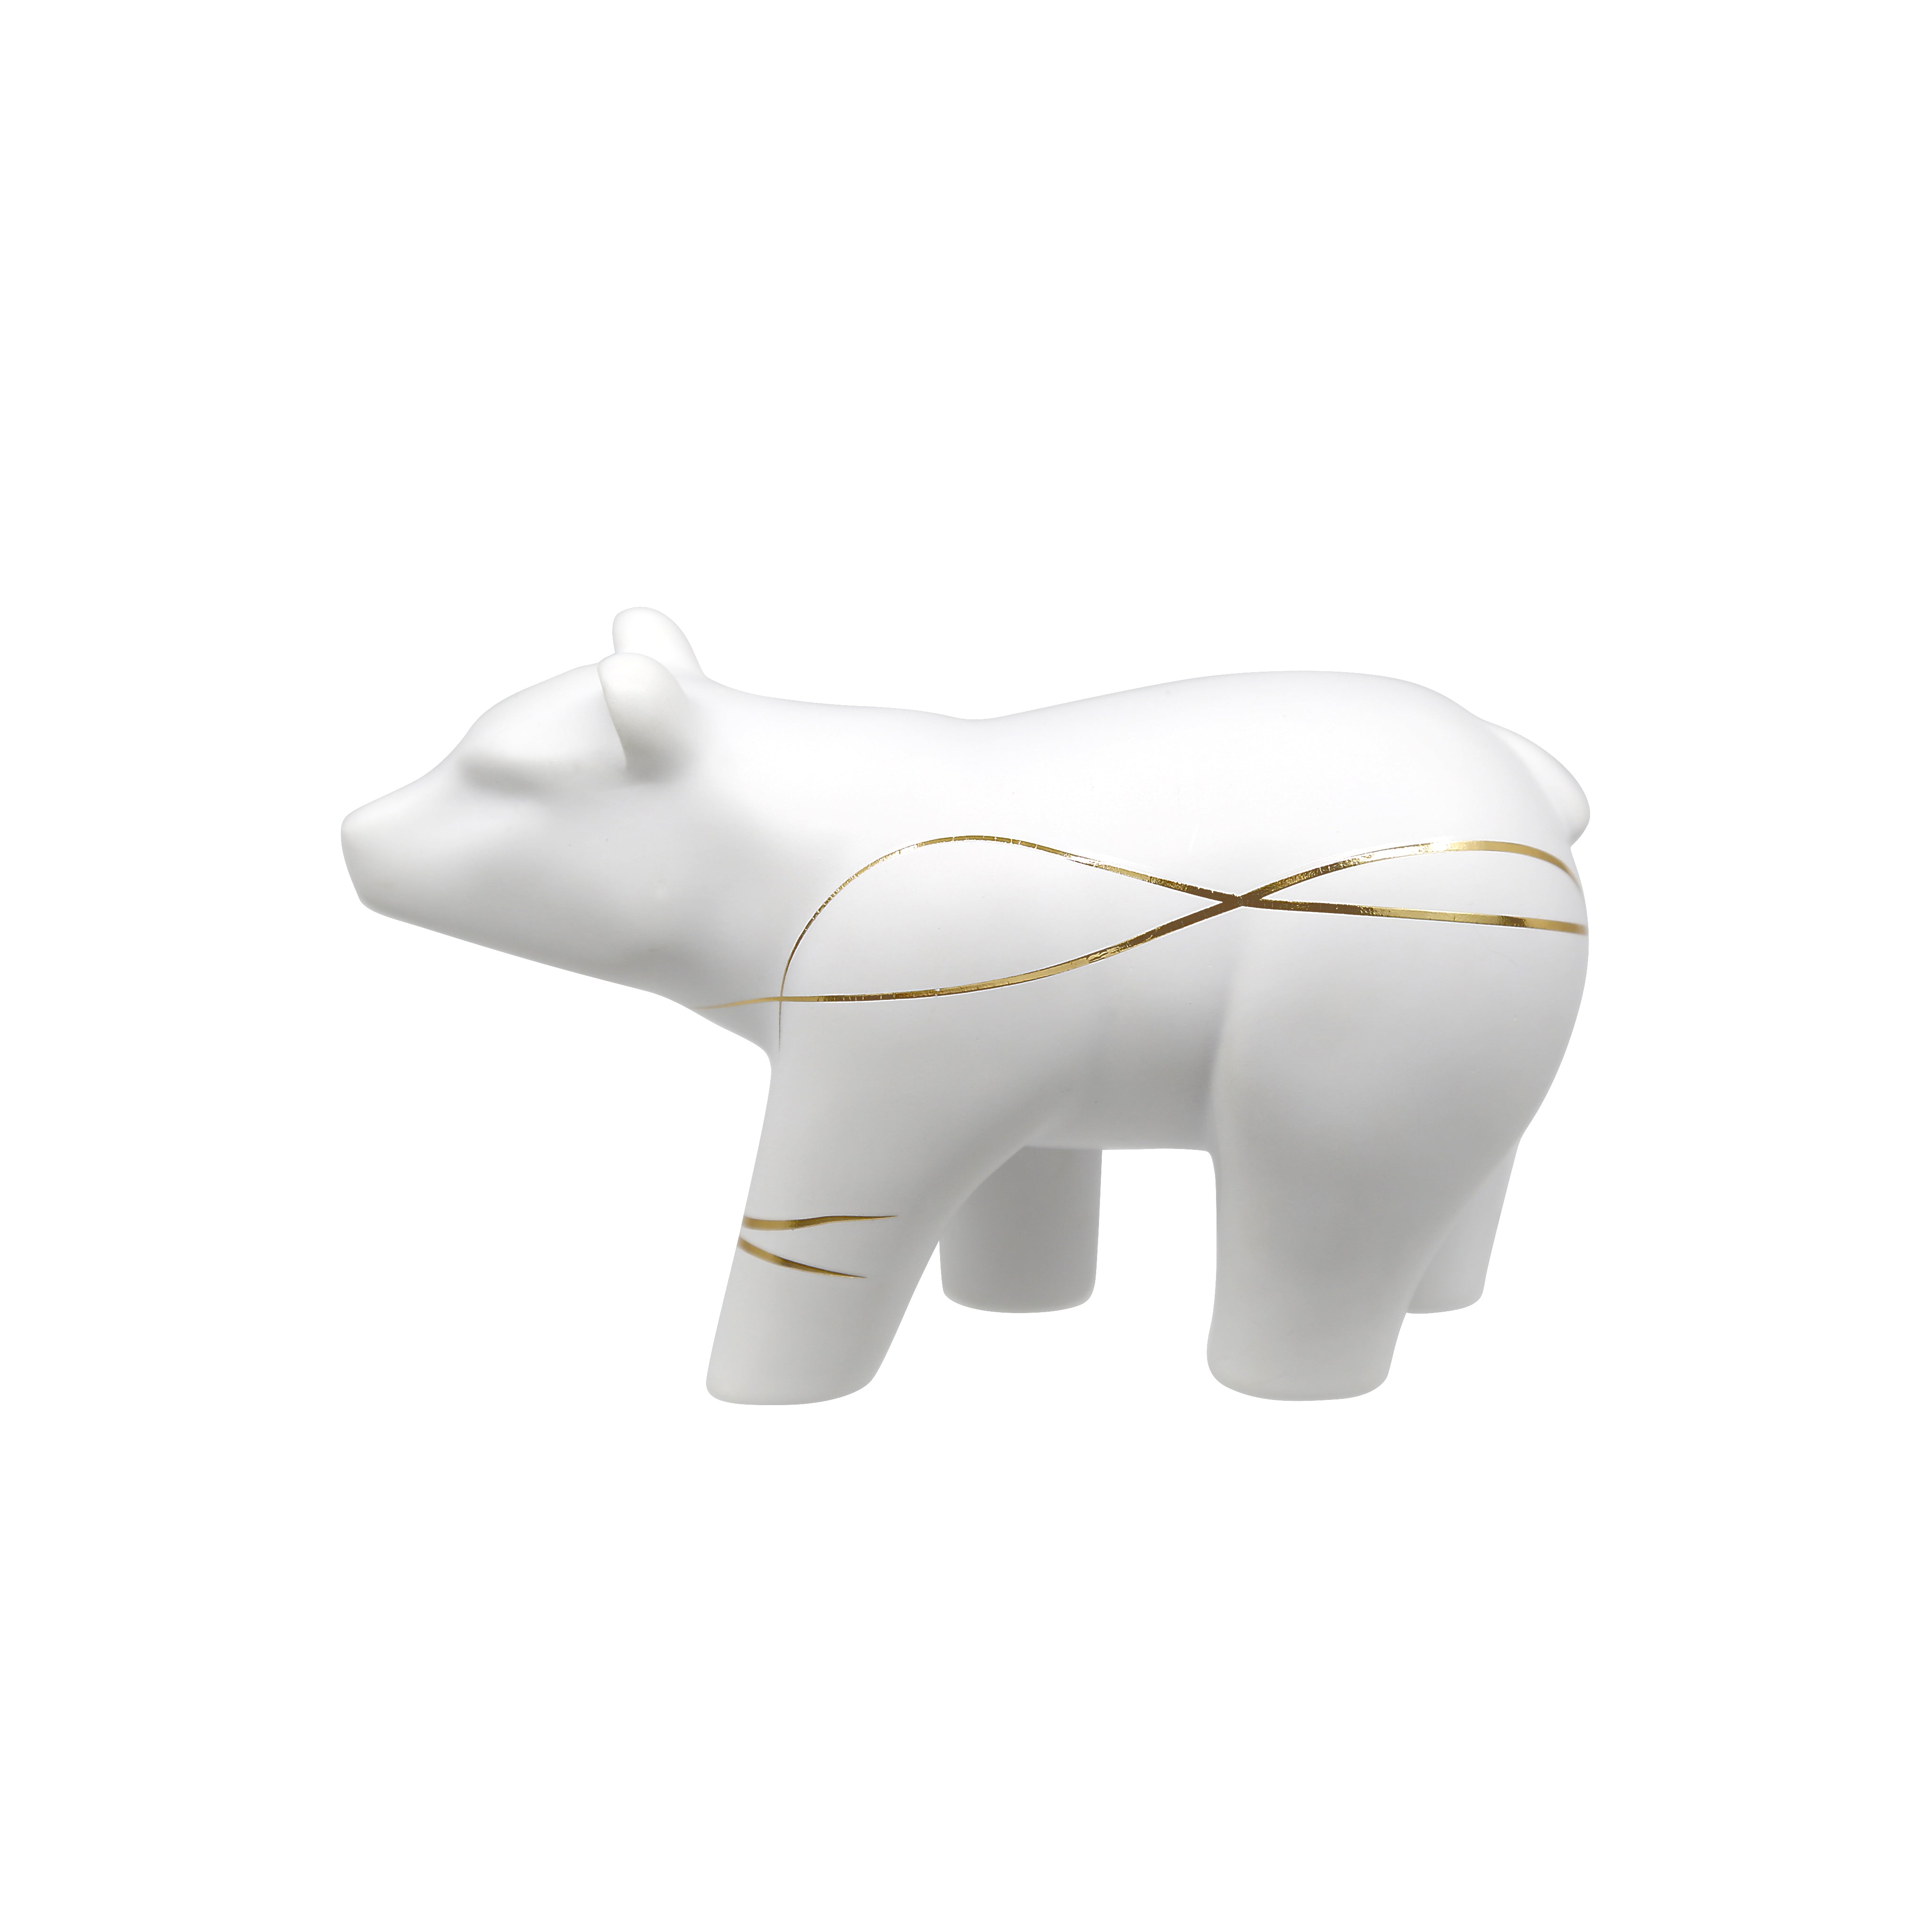 a white ceramic bear figurine with gold lines